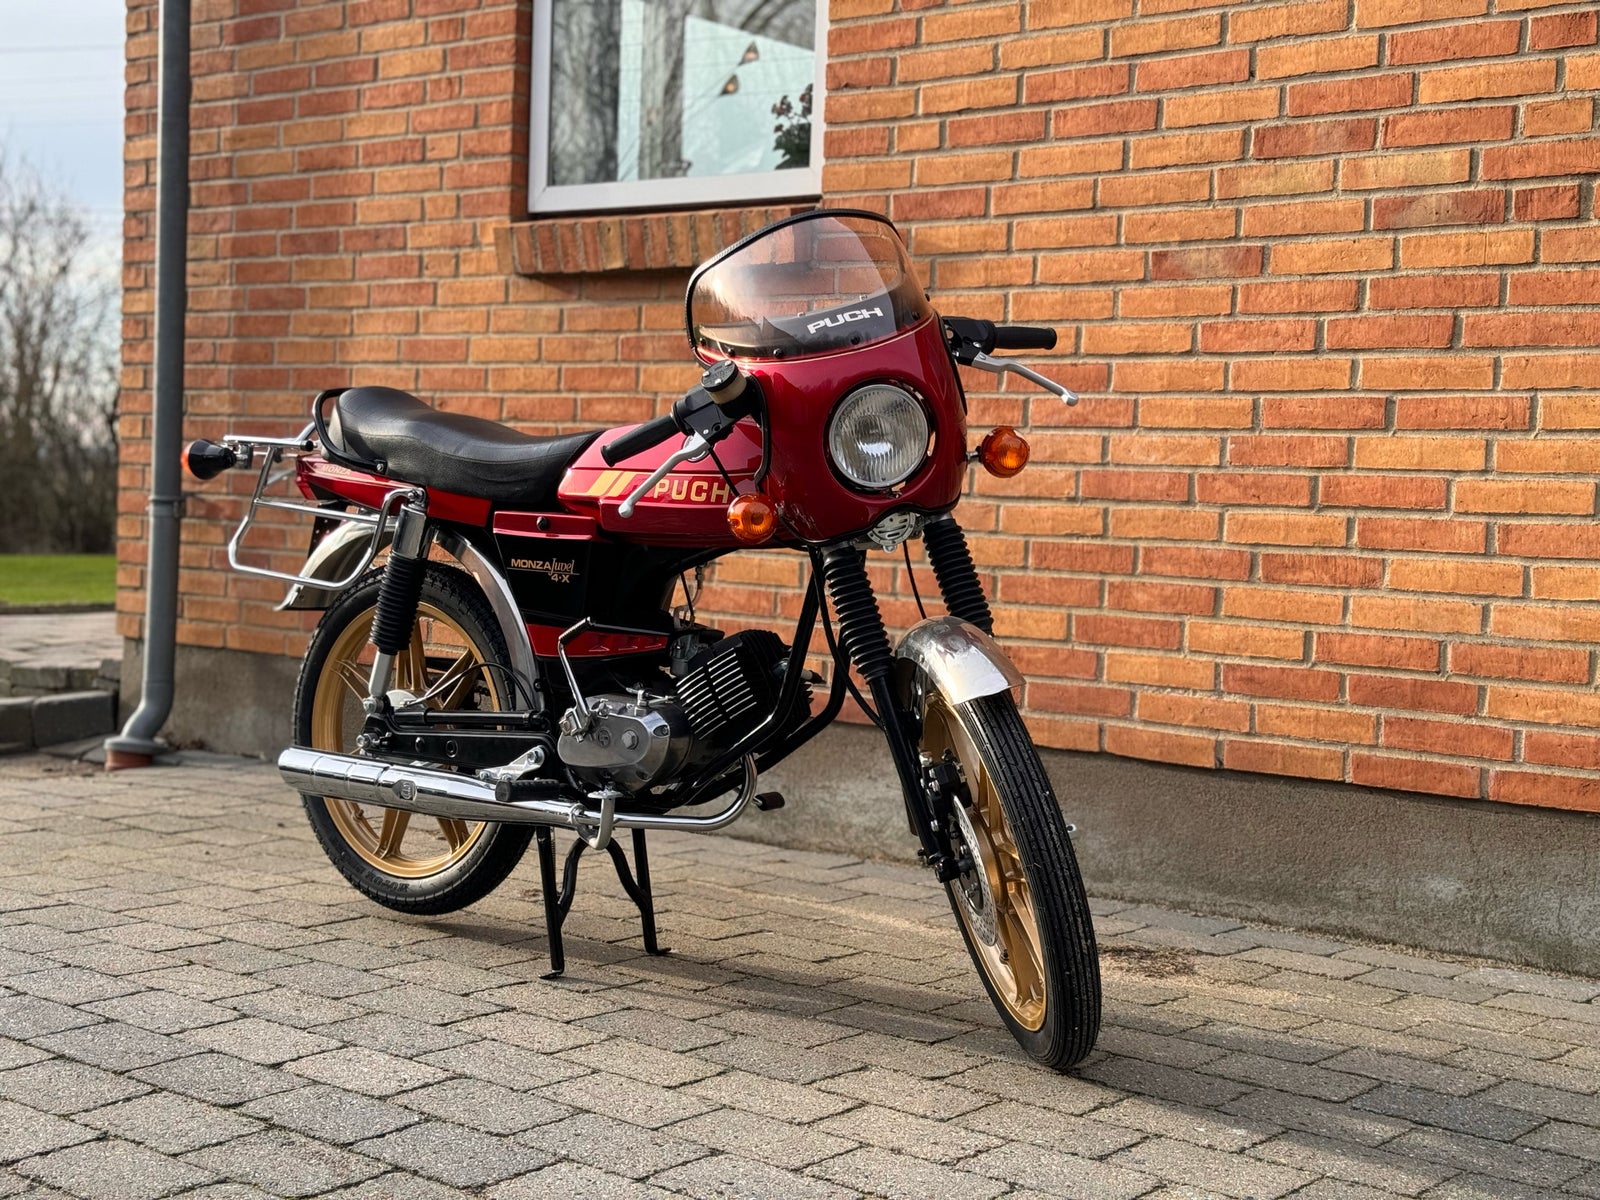 Puch Monza juvel, 1979, 12435 km